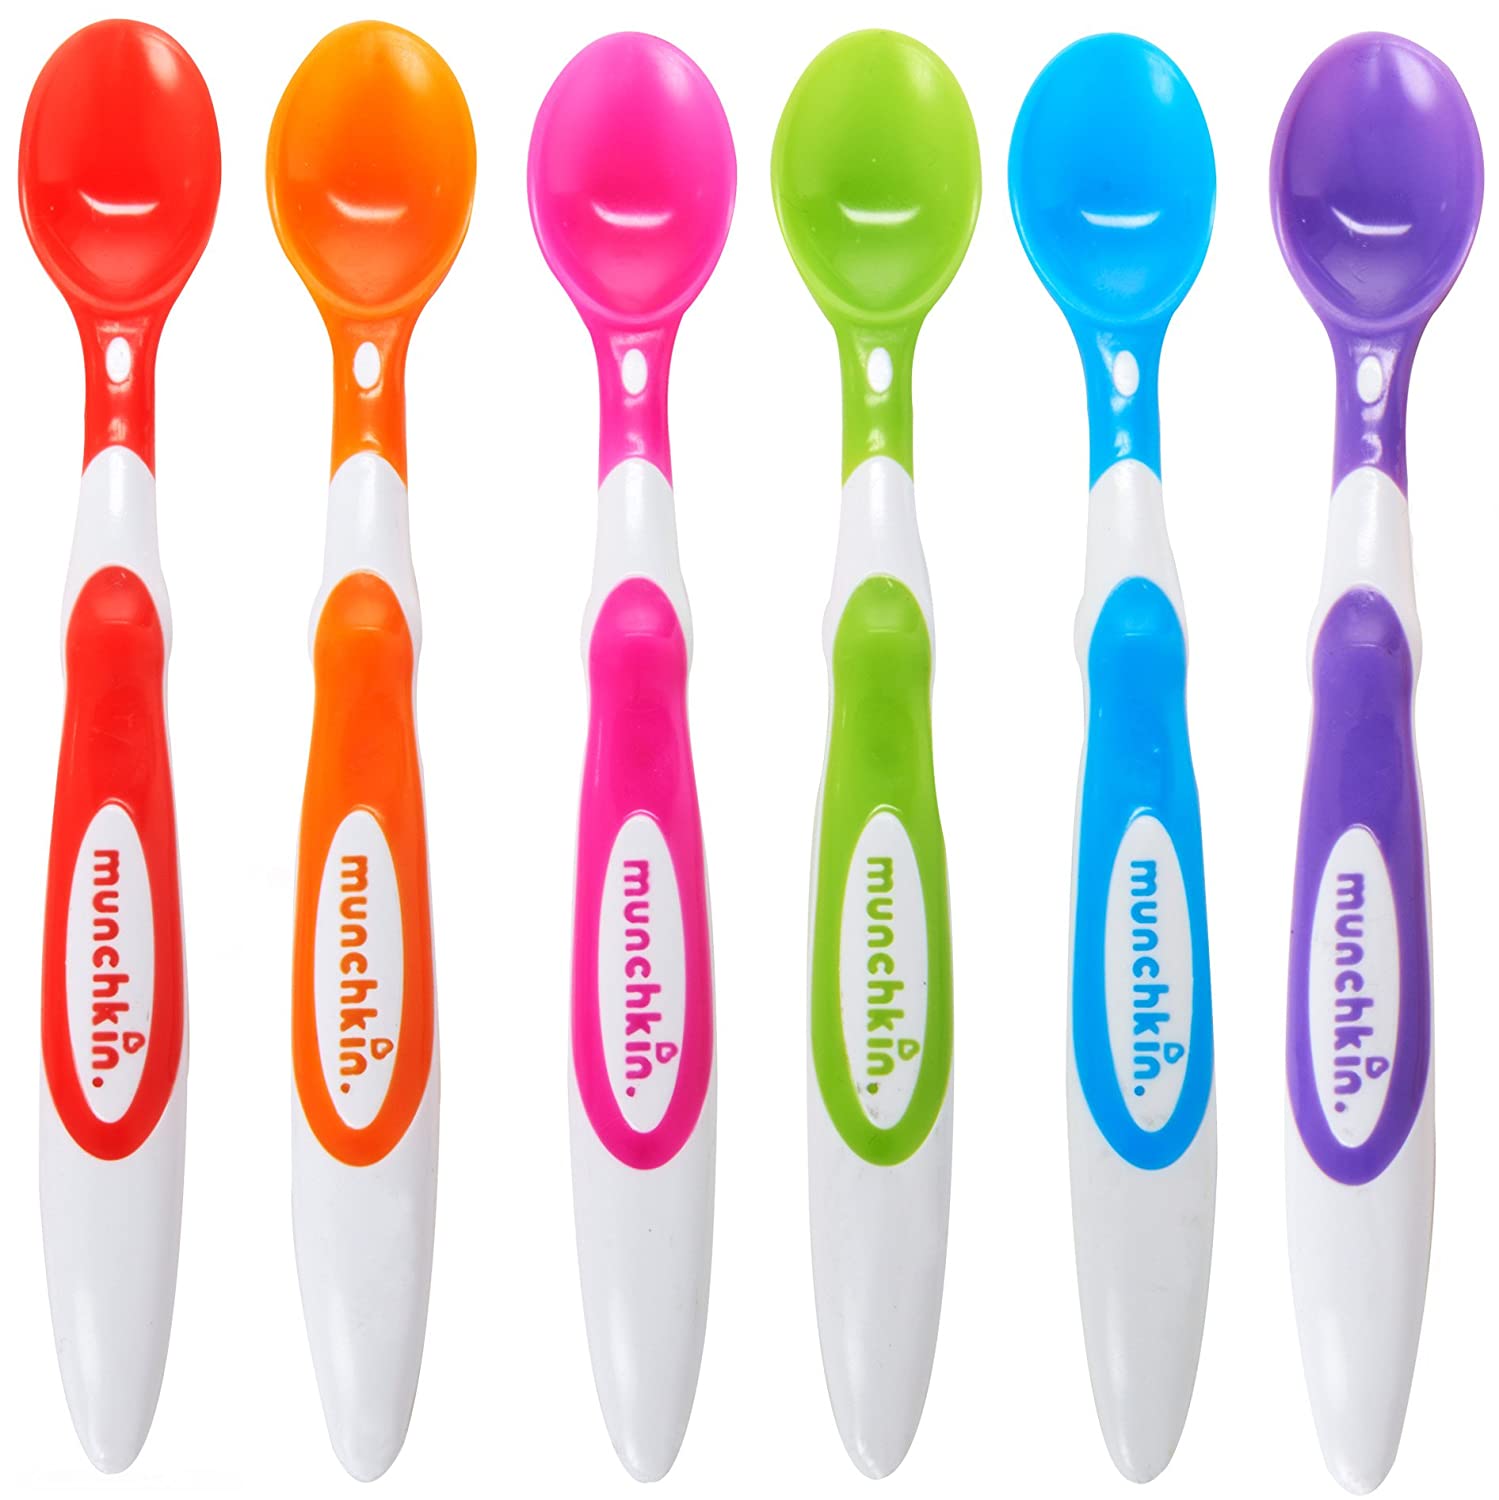 Top 9 Best Baby Spoons for Self Feeding Reviews in 2022 2